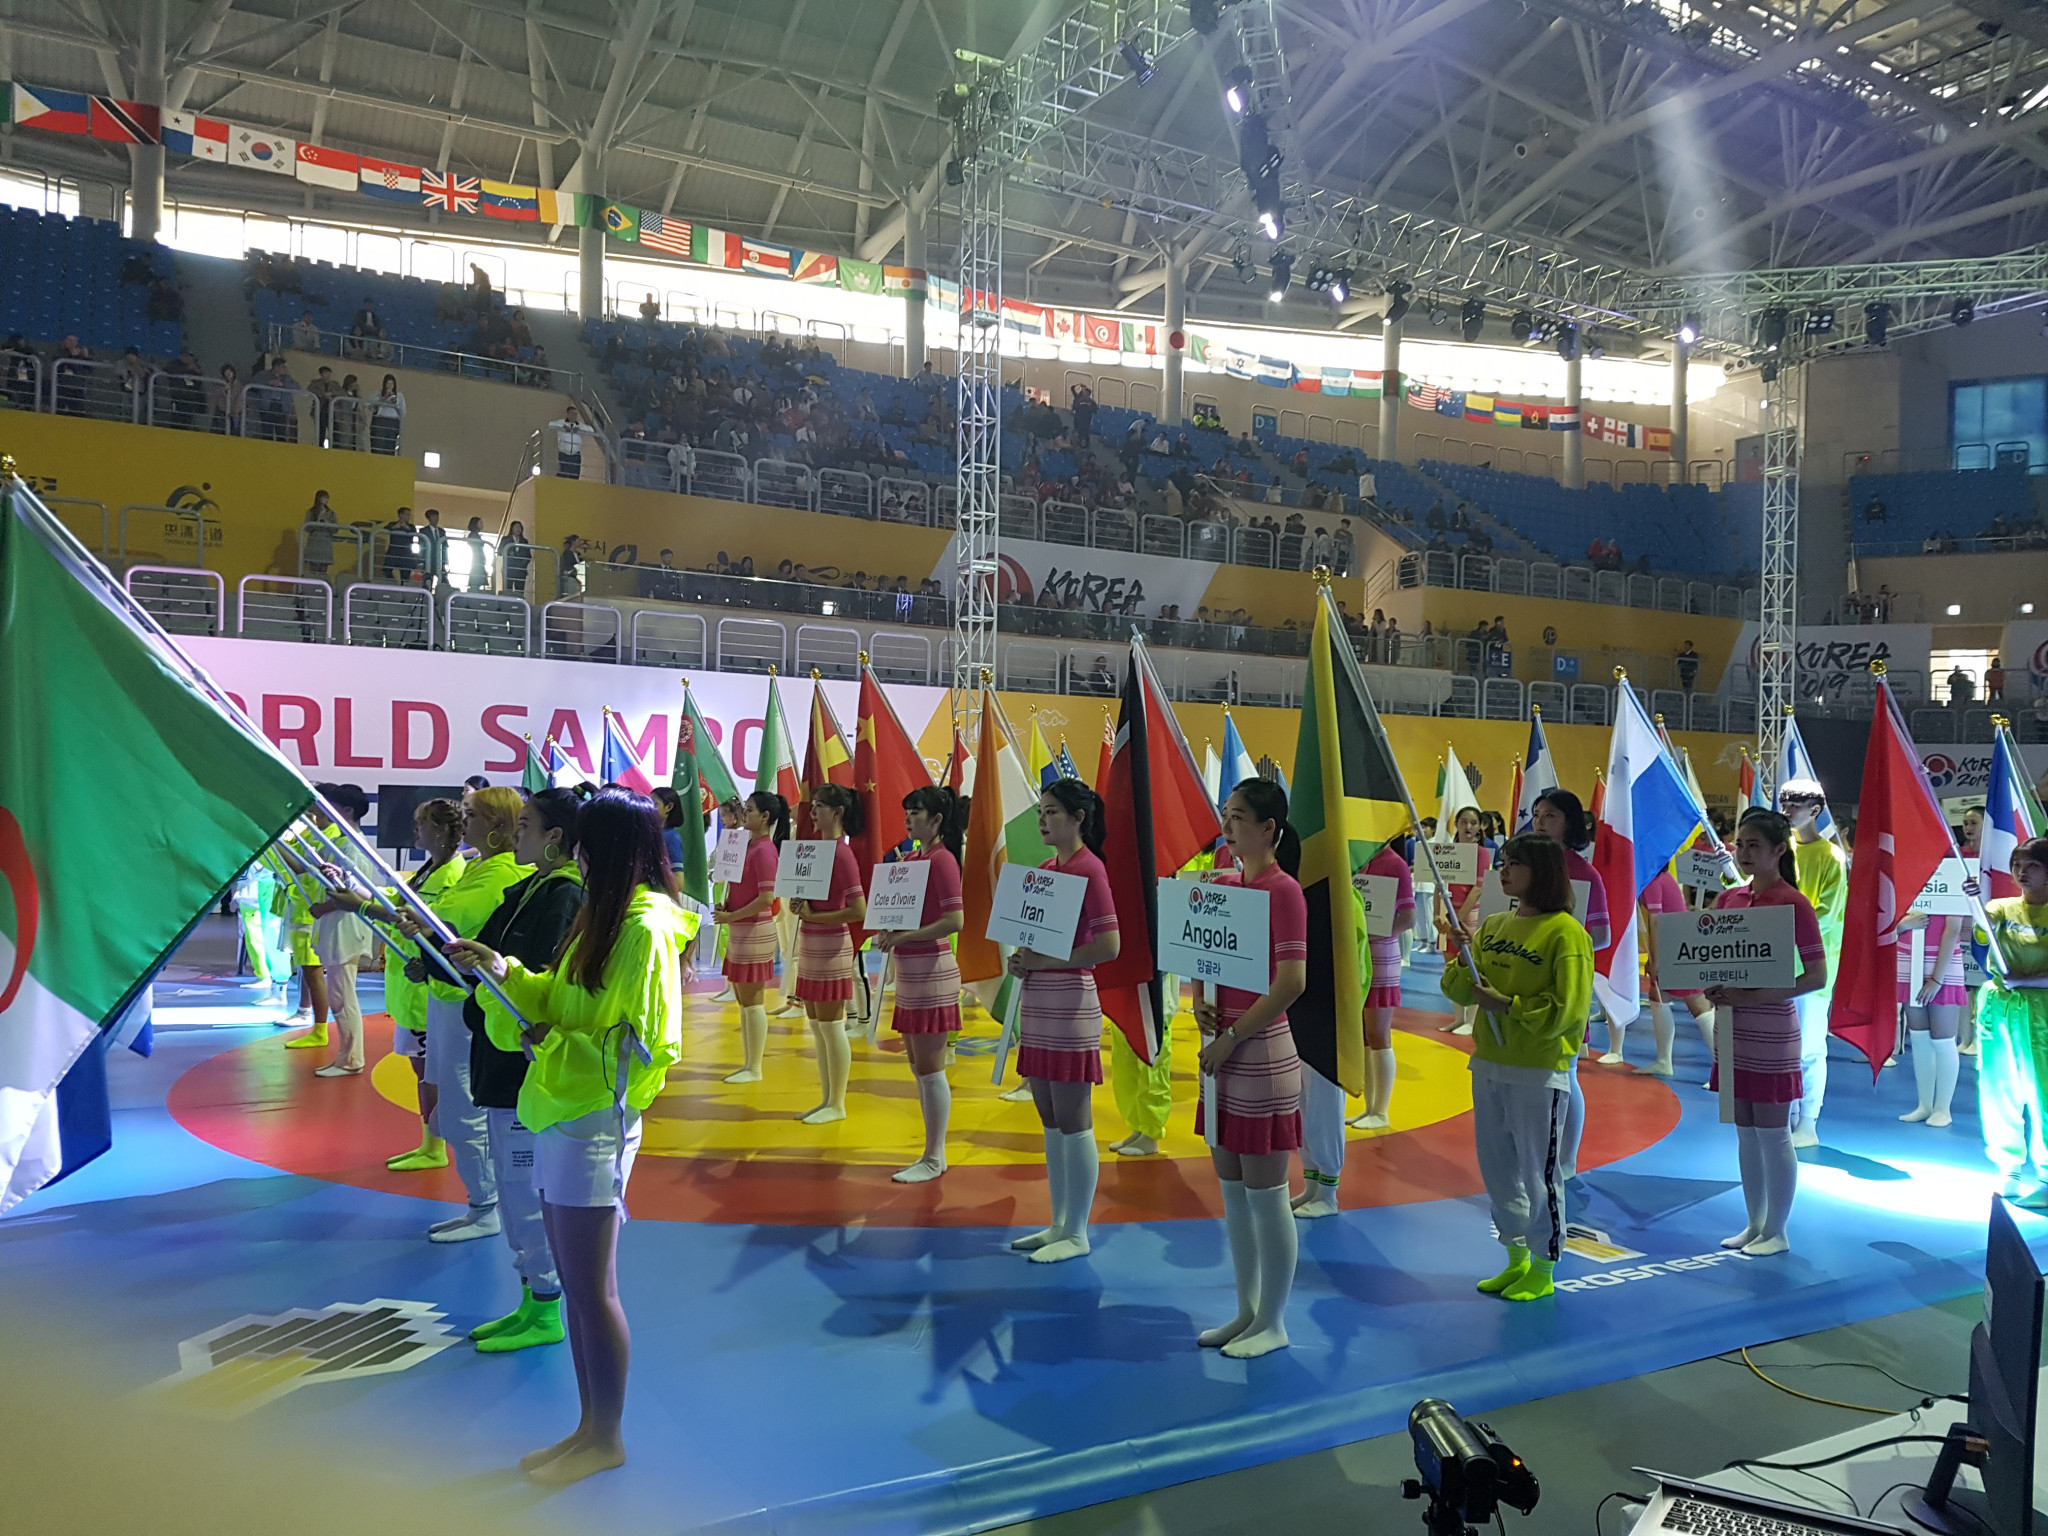 Huge cheers rang around Sukwoo Culture Gym as the flag parade made its way into the arena during the Opening Ceremony ©ITG 